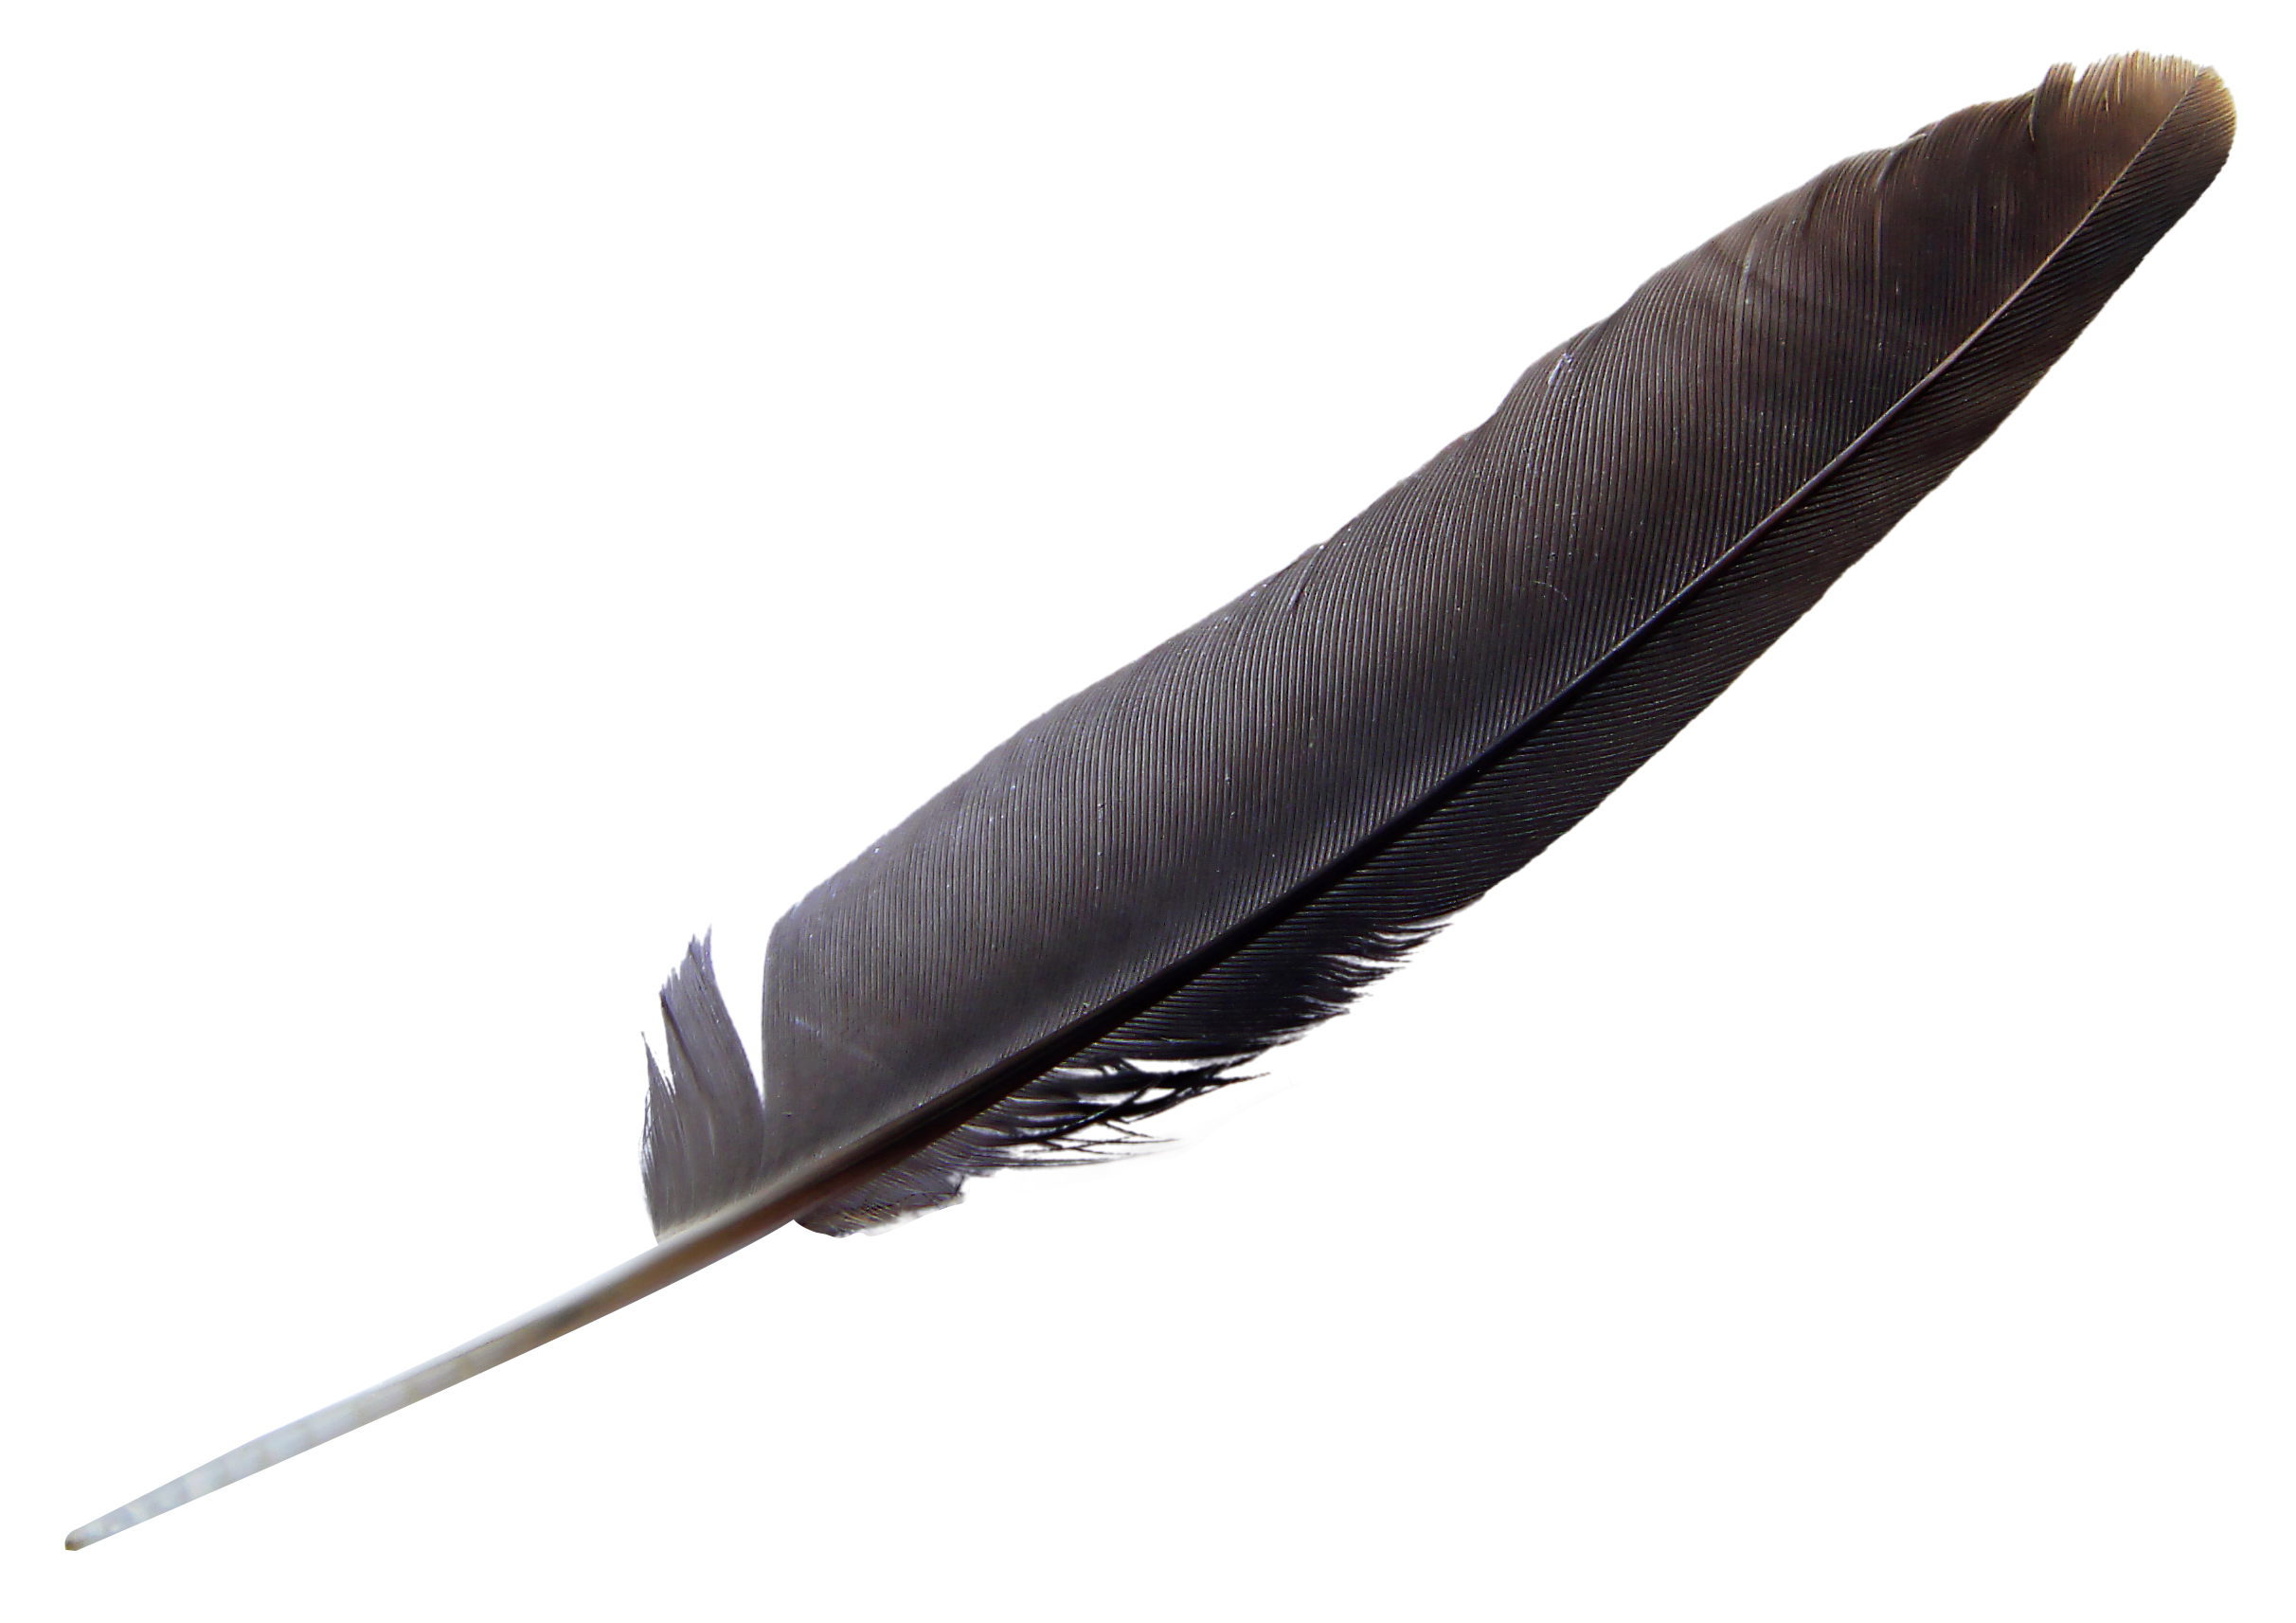 Bird Feather Download PNG Image